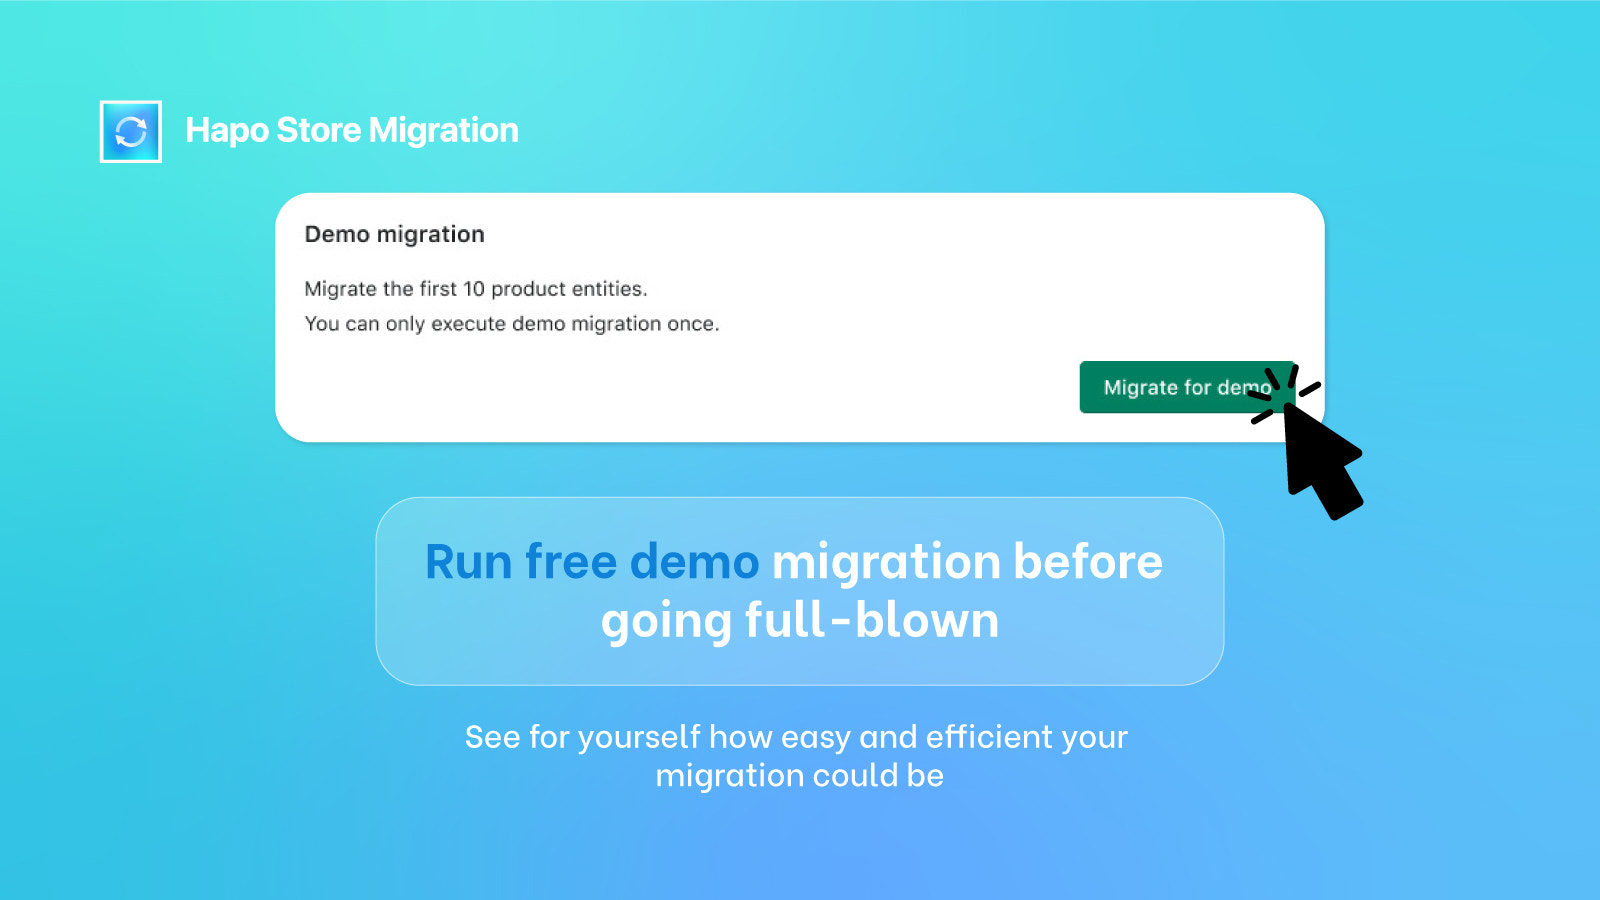 Run free demo store migration before going full-blown